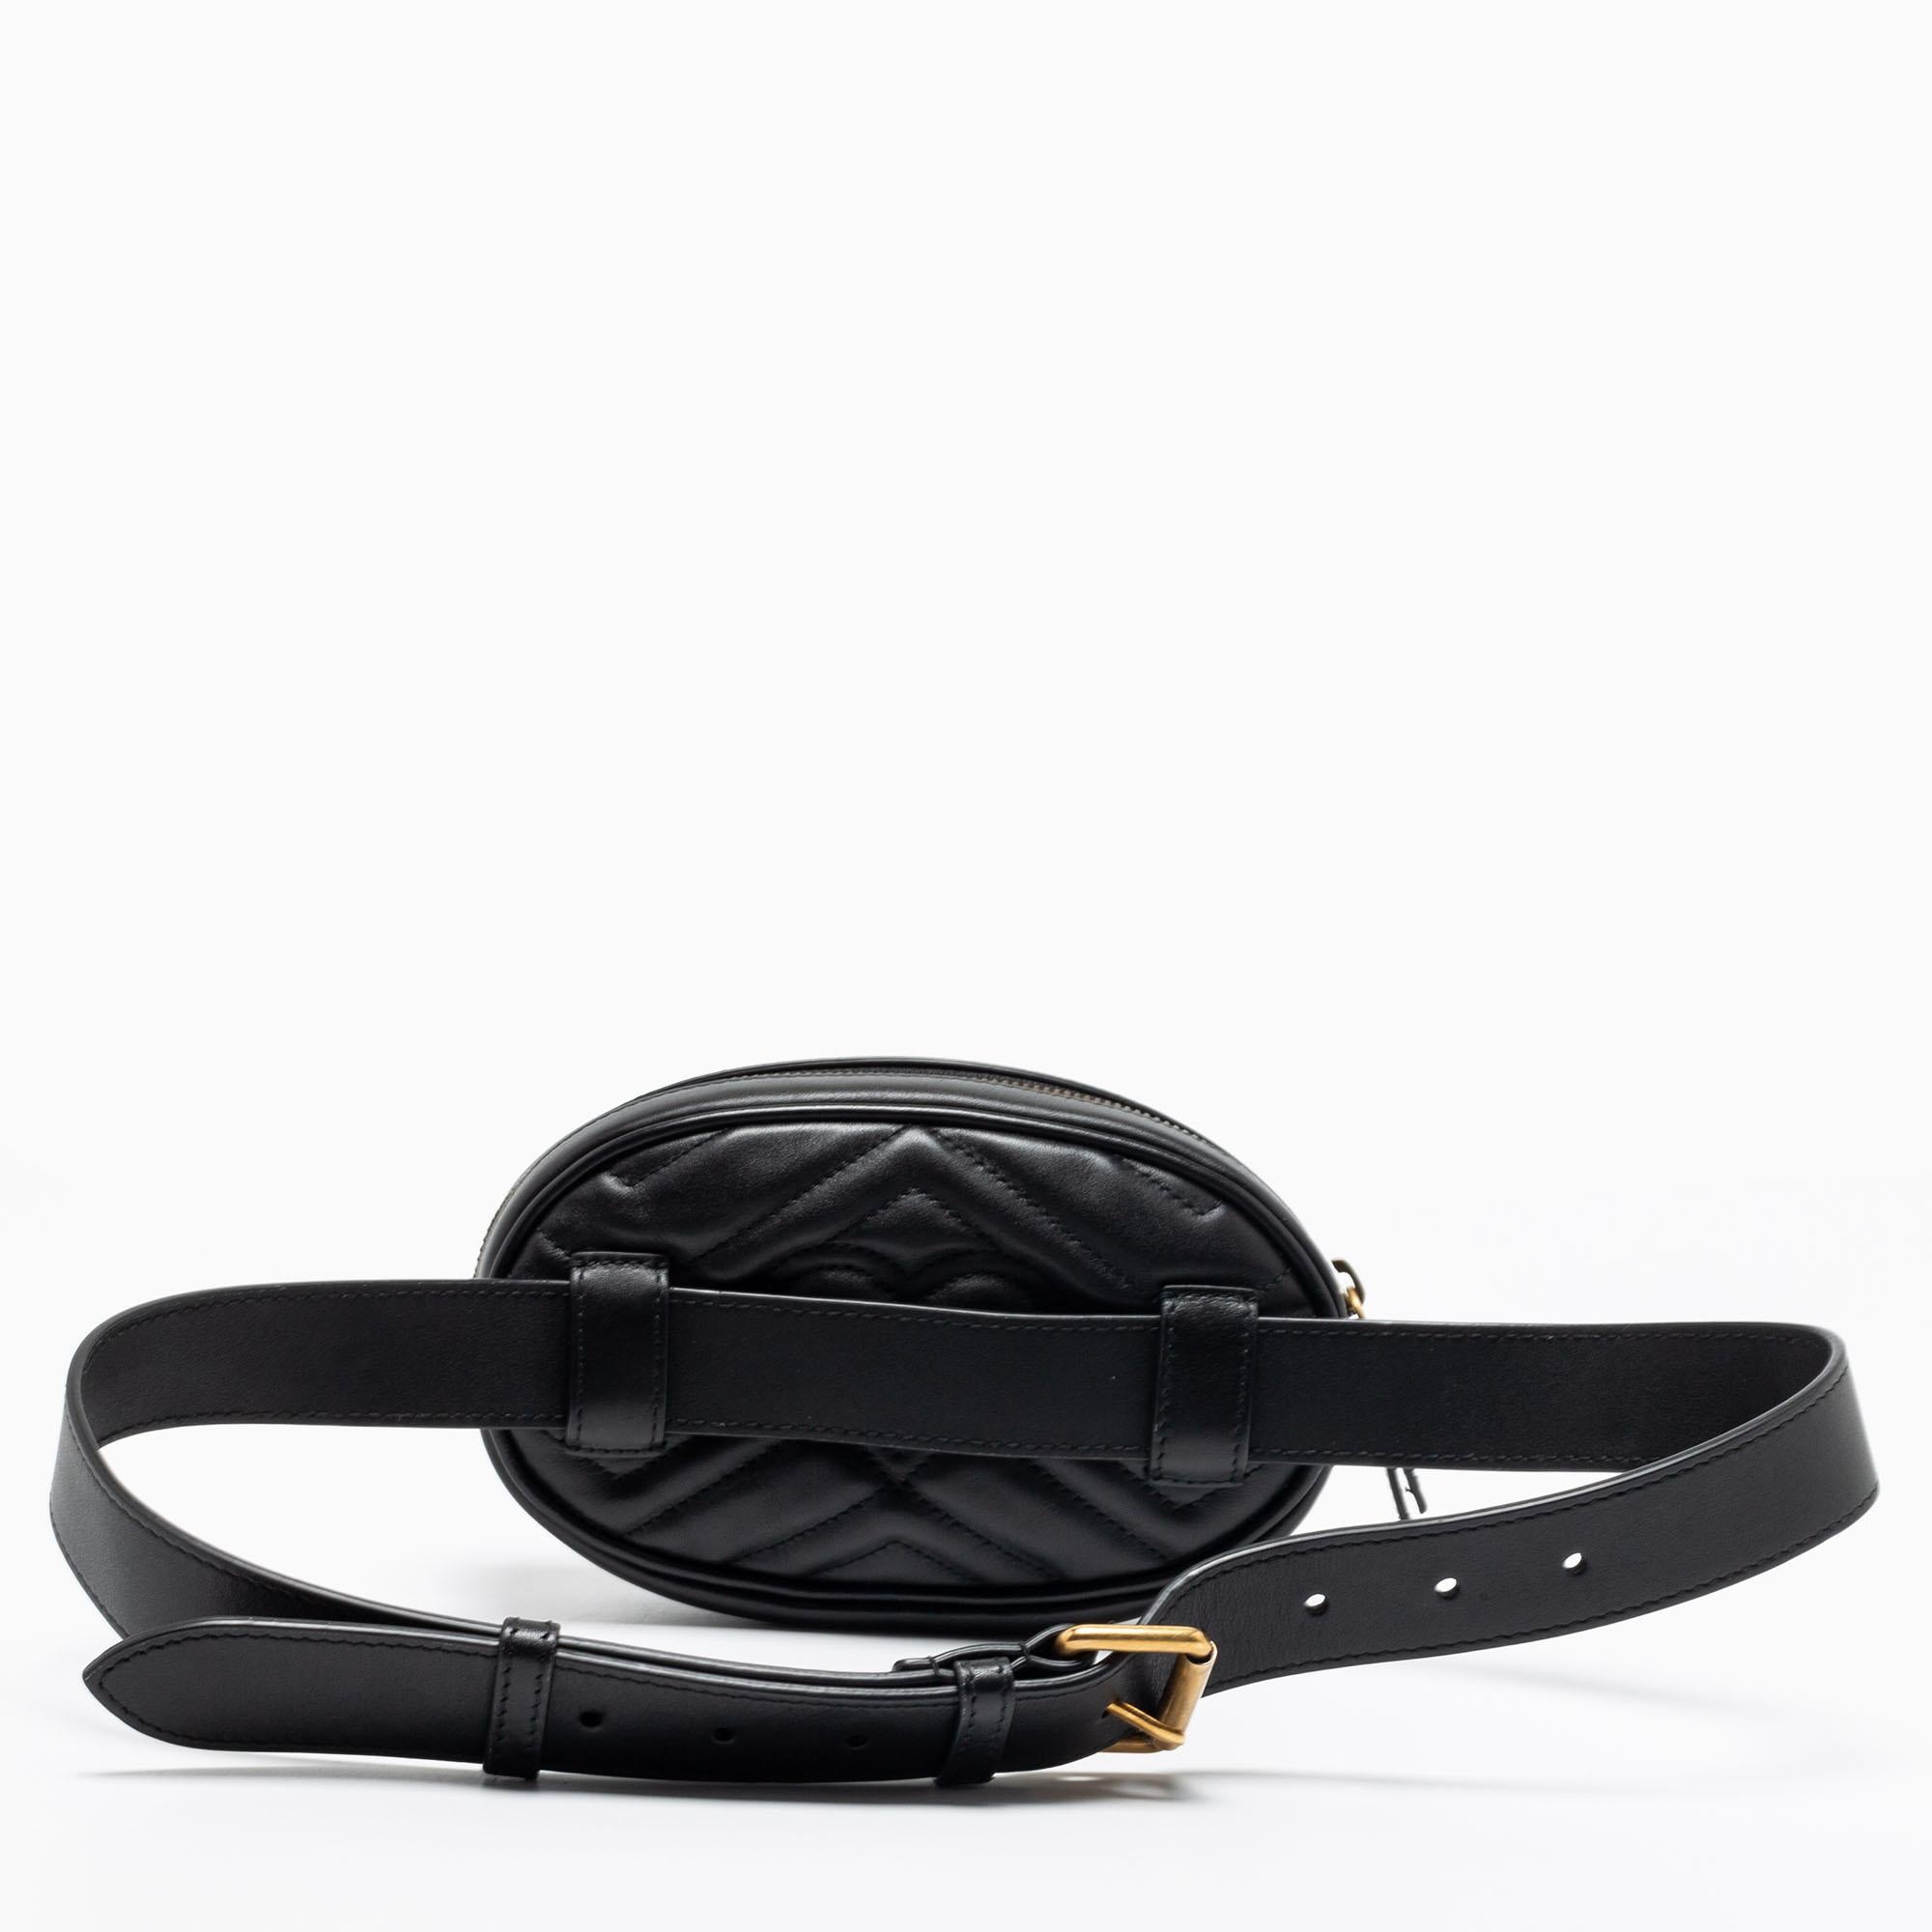 The GG Marmont belt bag was released in the brand's Pre-Fall 2017 collection, and it went on to be a hit! This one here in black matelassé leather has the signature oval-like shape and is equipped with a zipper fastening to secure the well-sized